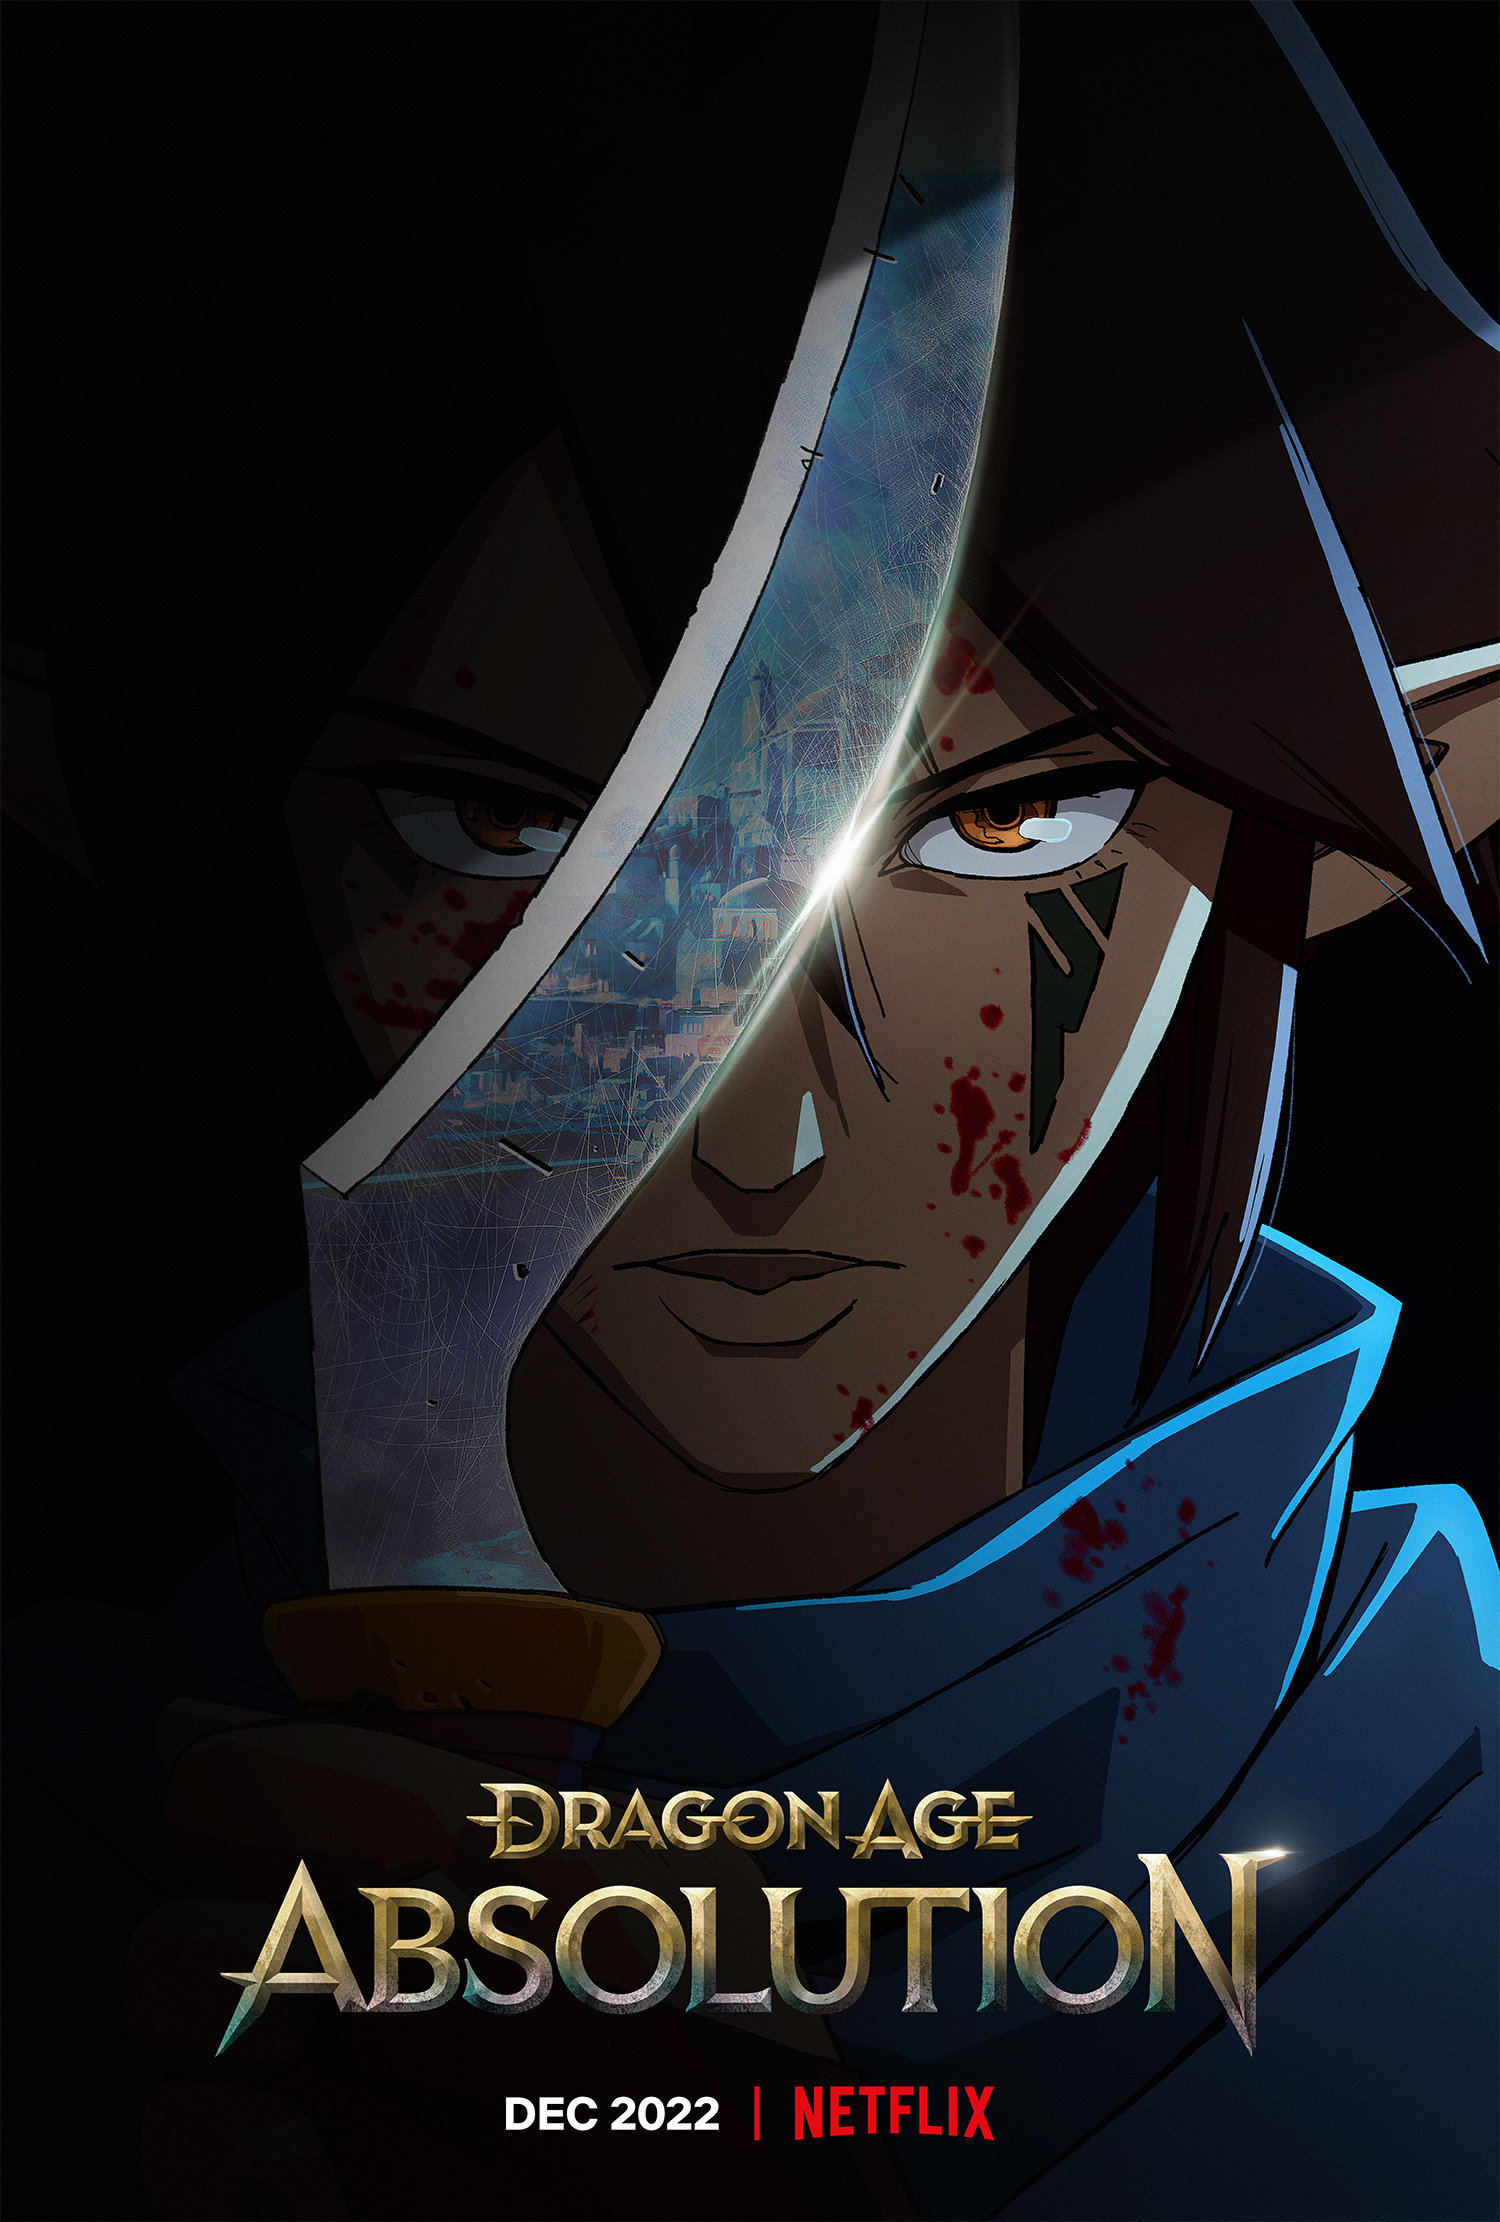 Dragon Age: Absolution artwork of a determined character with pointy ears holding a blade up in front of their face and logo.